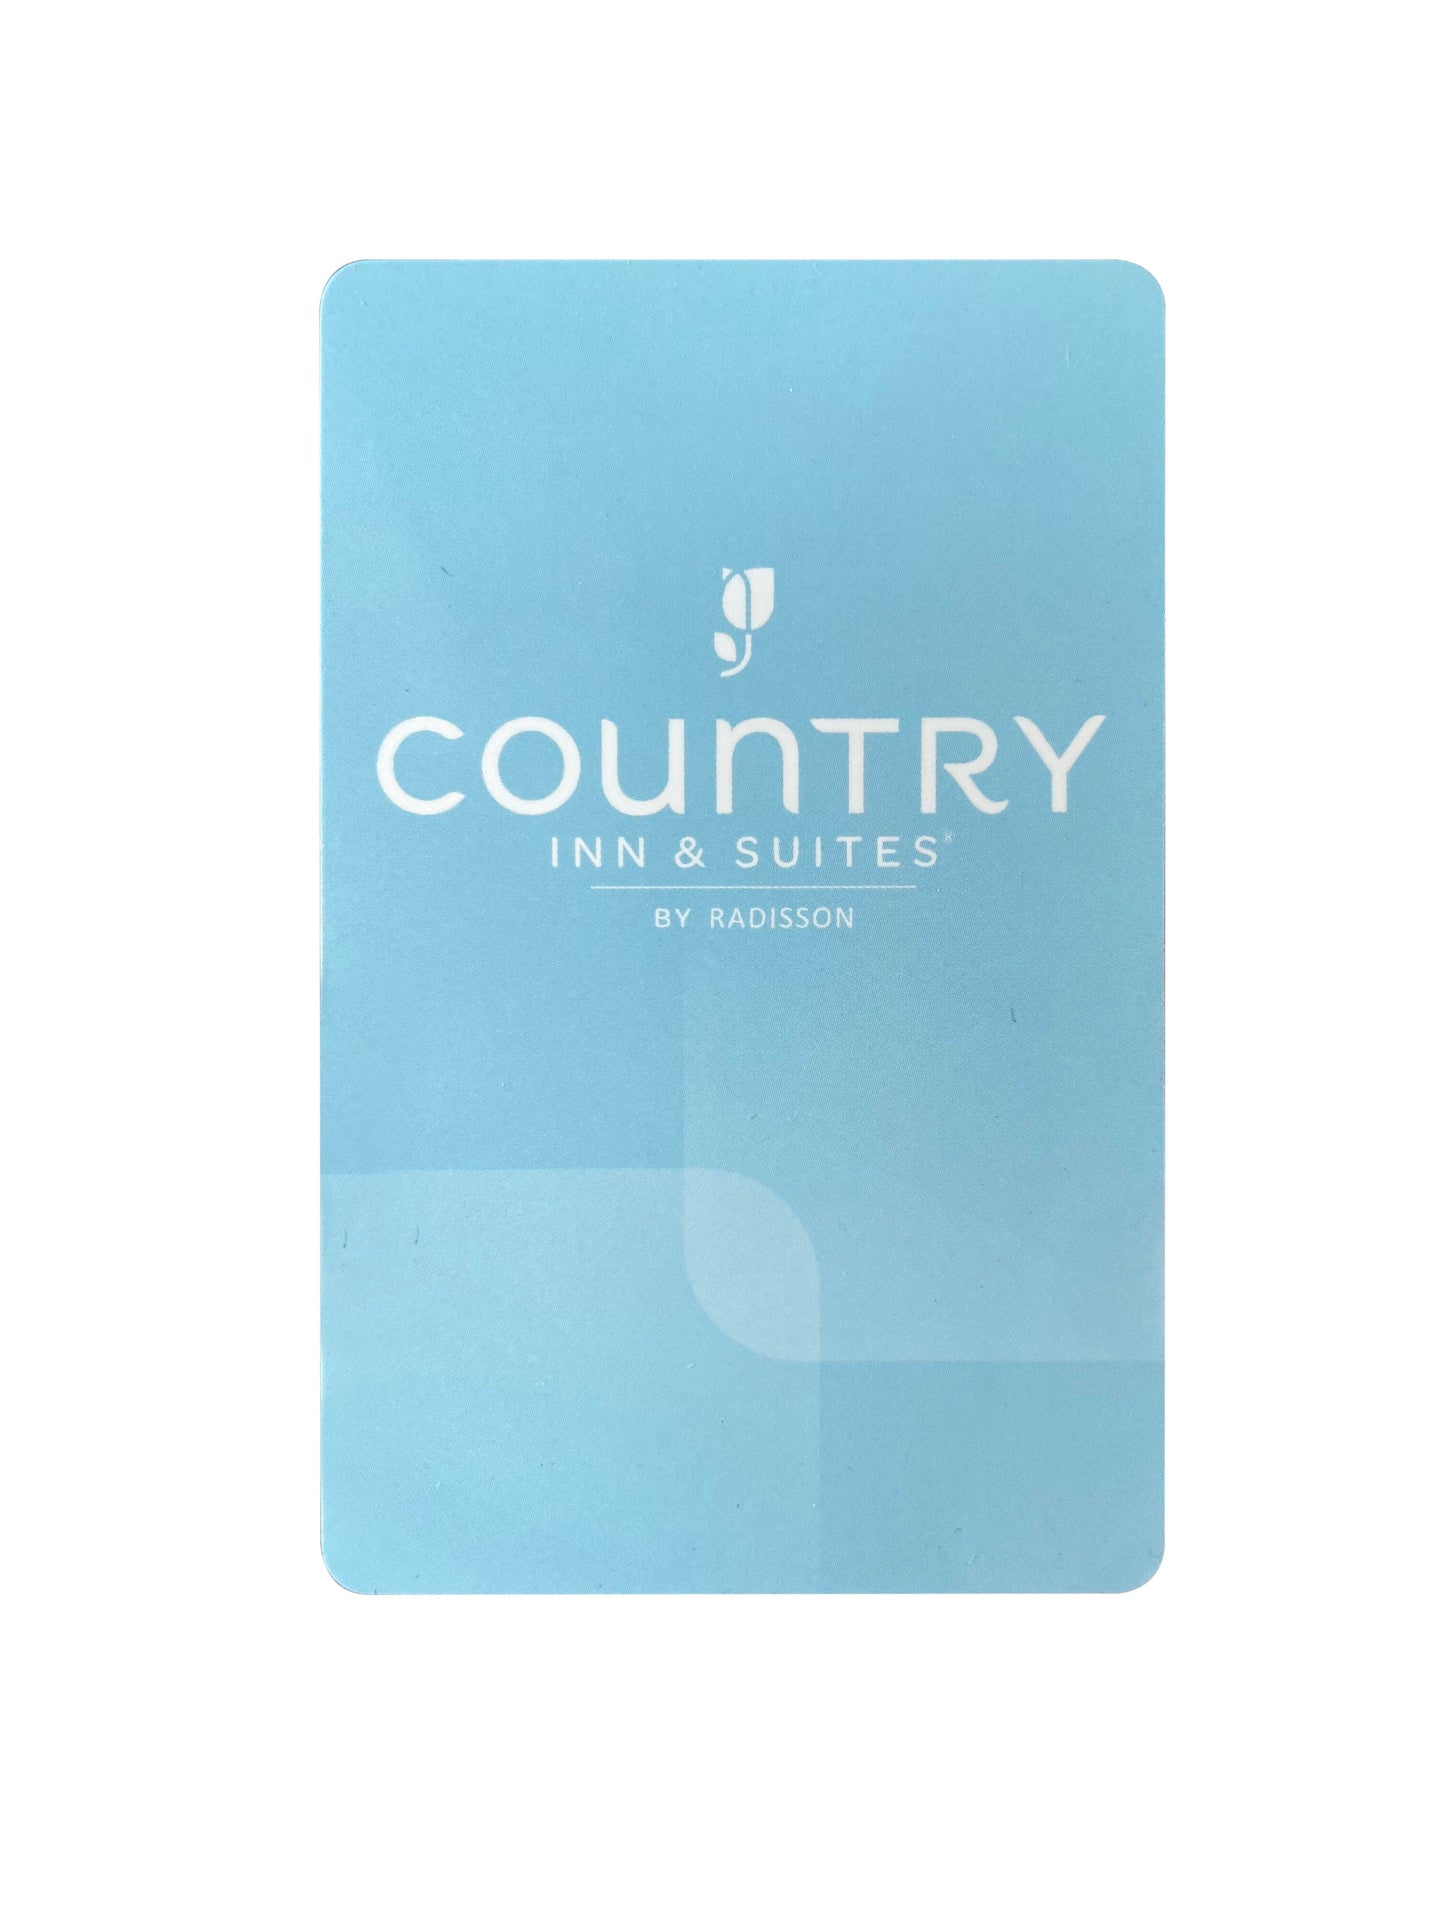 Country Inn and Suites ULEV1 48 byte RFID Key Cards Compatible with Assa Abloy* Guest Lock Systems-See Description (Sold in boxes of 200)